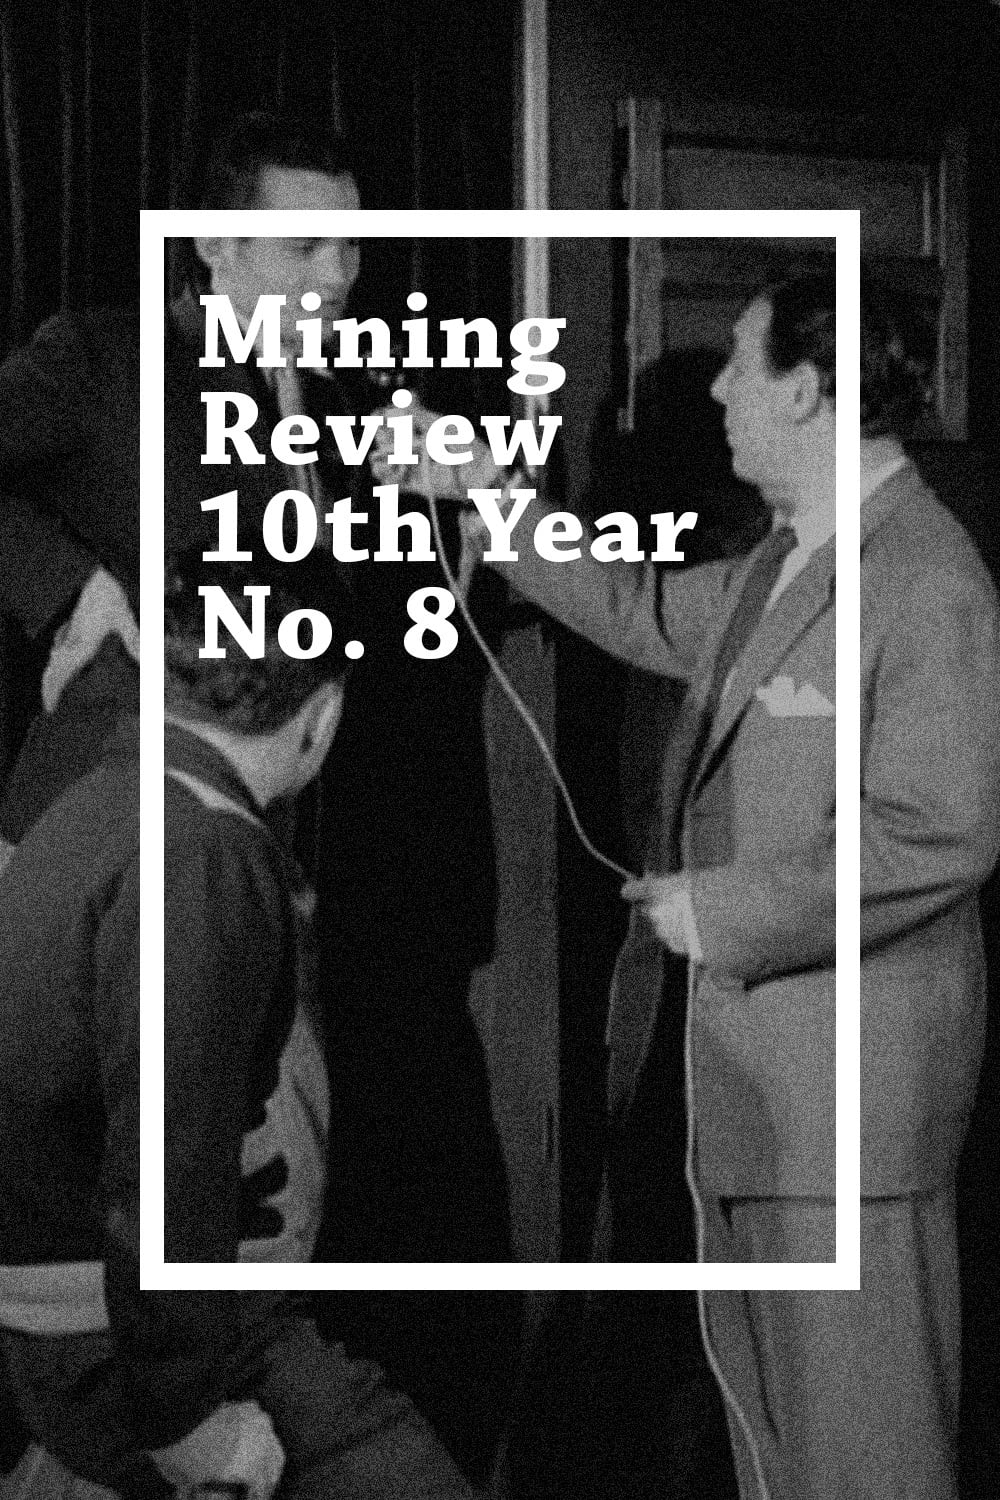 Mining Review 10th Year No. 8